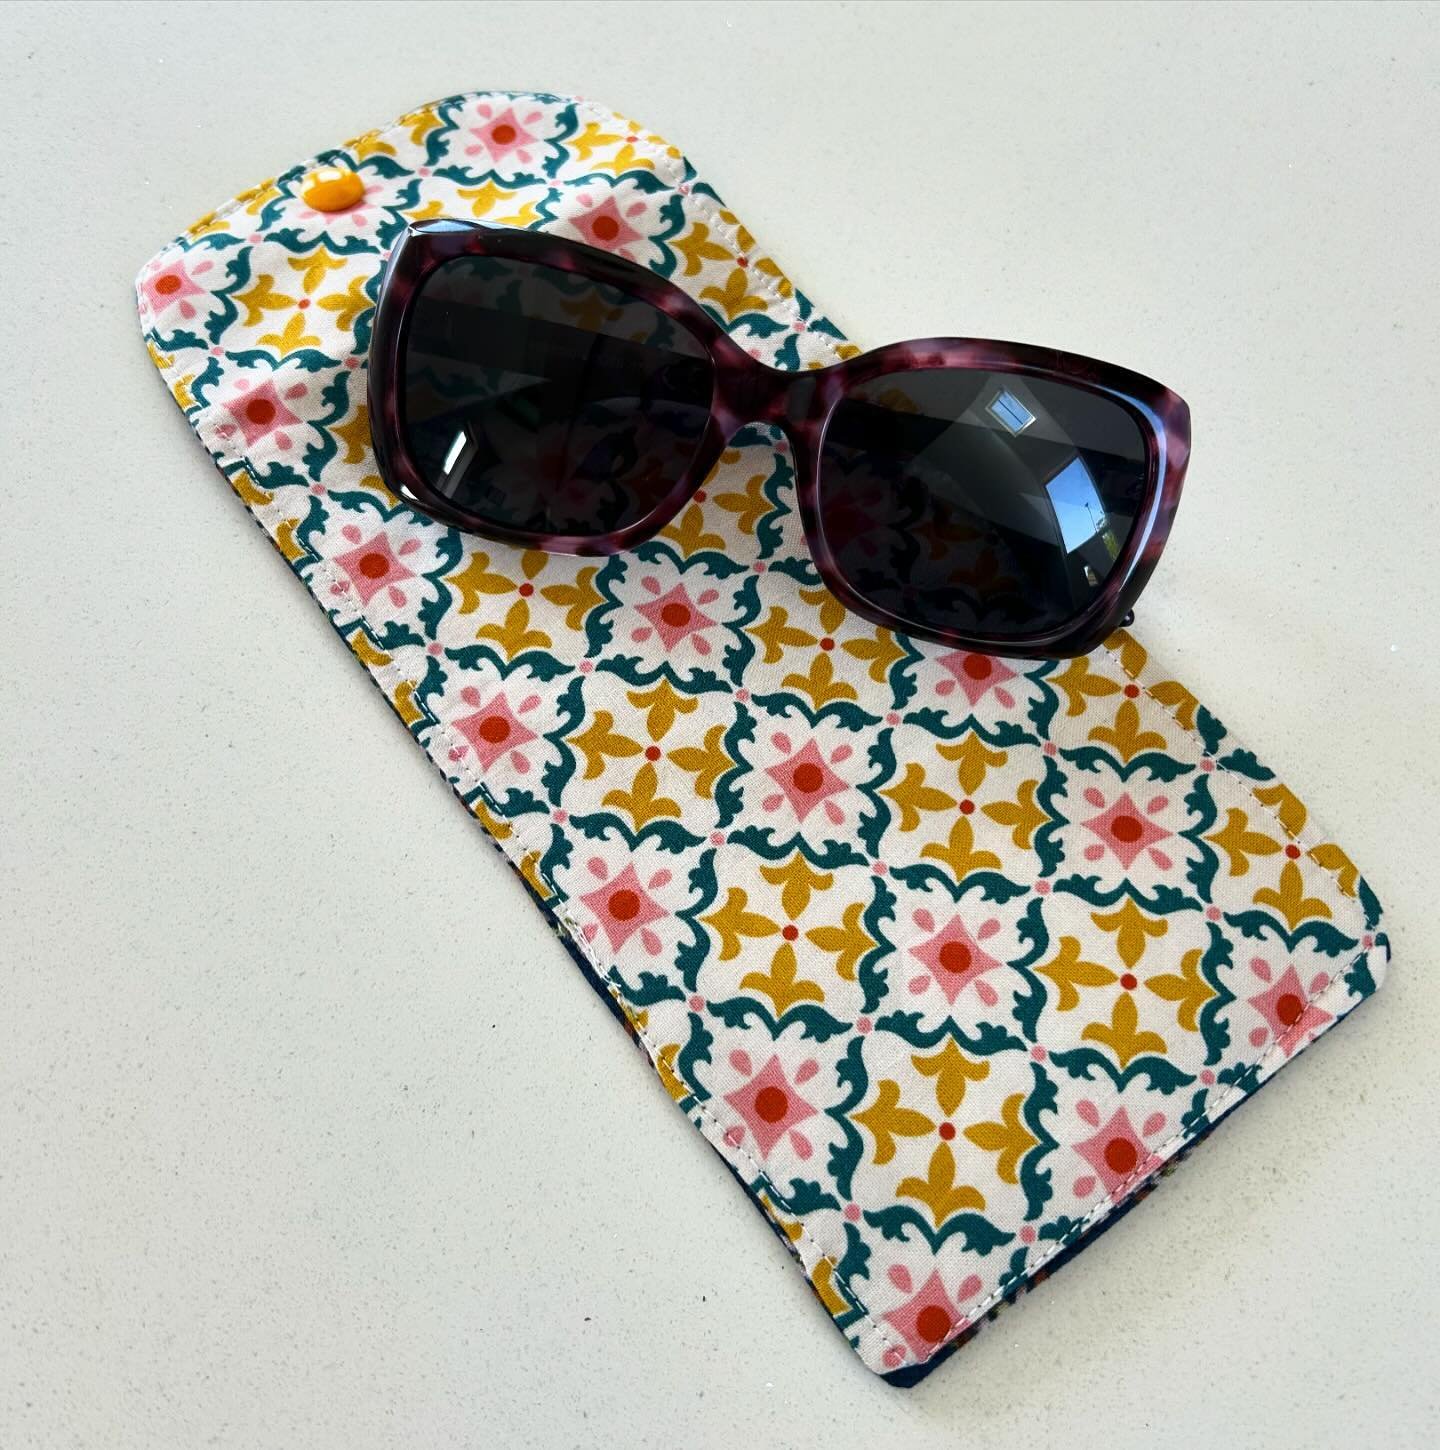 Just the day to finish my new sunglasses case at my bag making class in Newark this morning. Though my sunglasses are being worn - woohoo - and not in the case just yet!